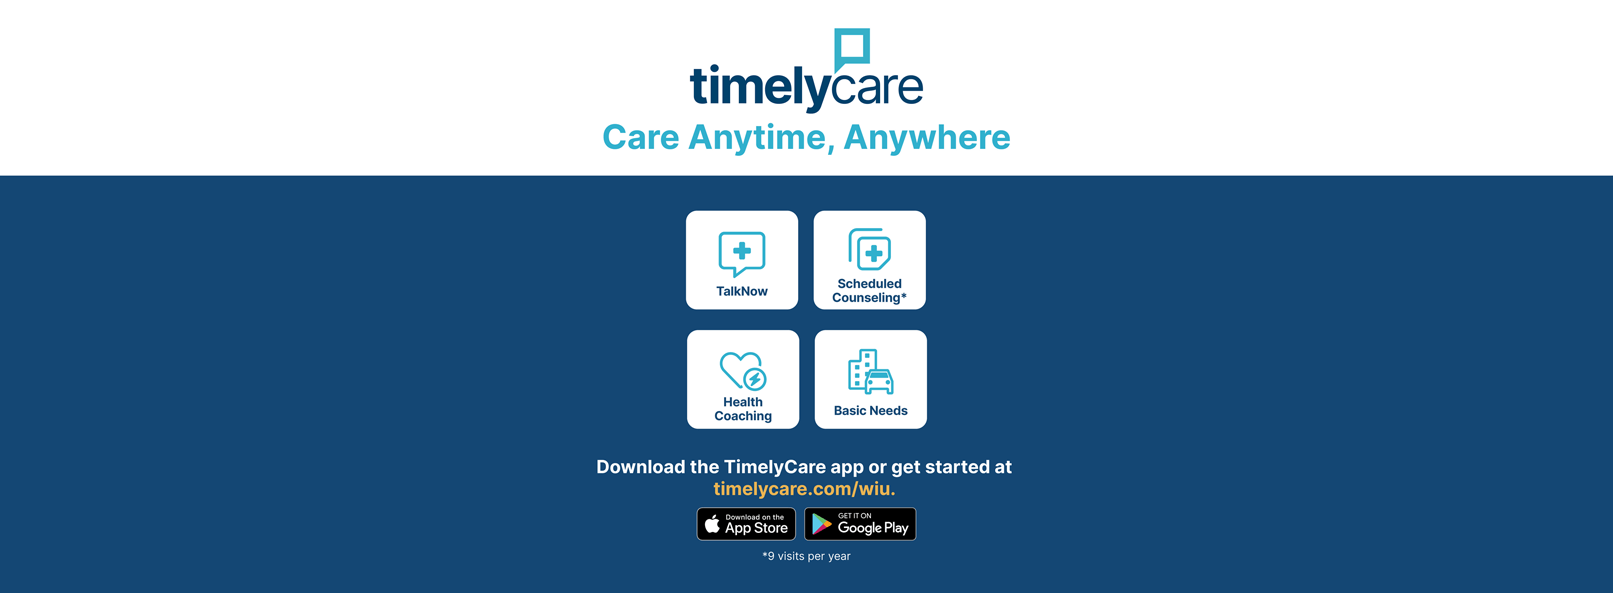 timelyCare graphic.